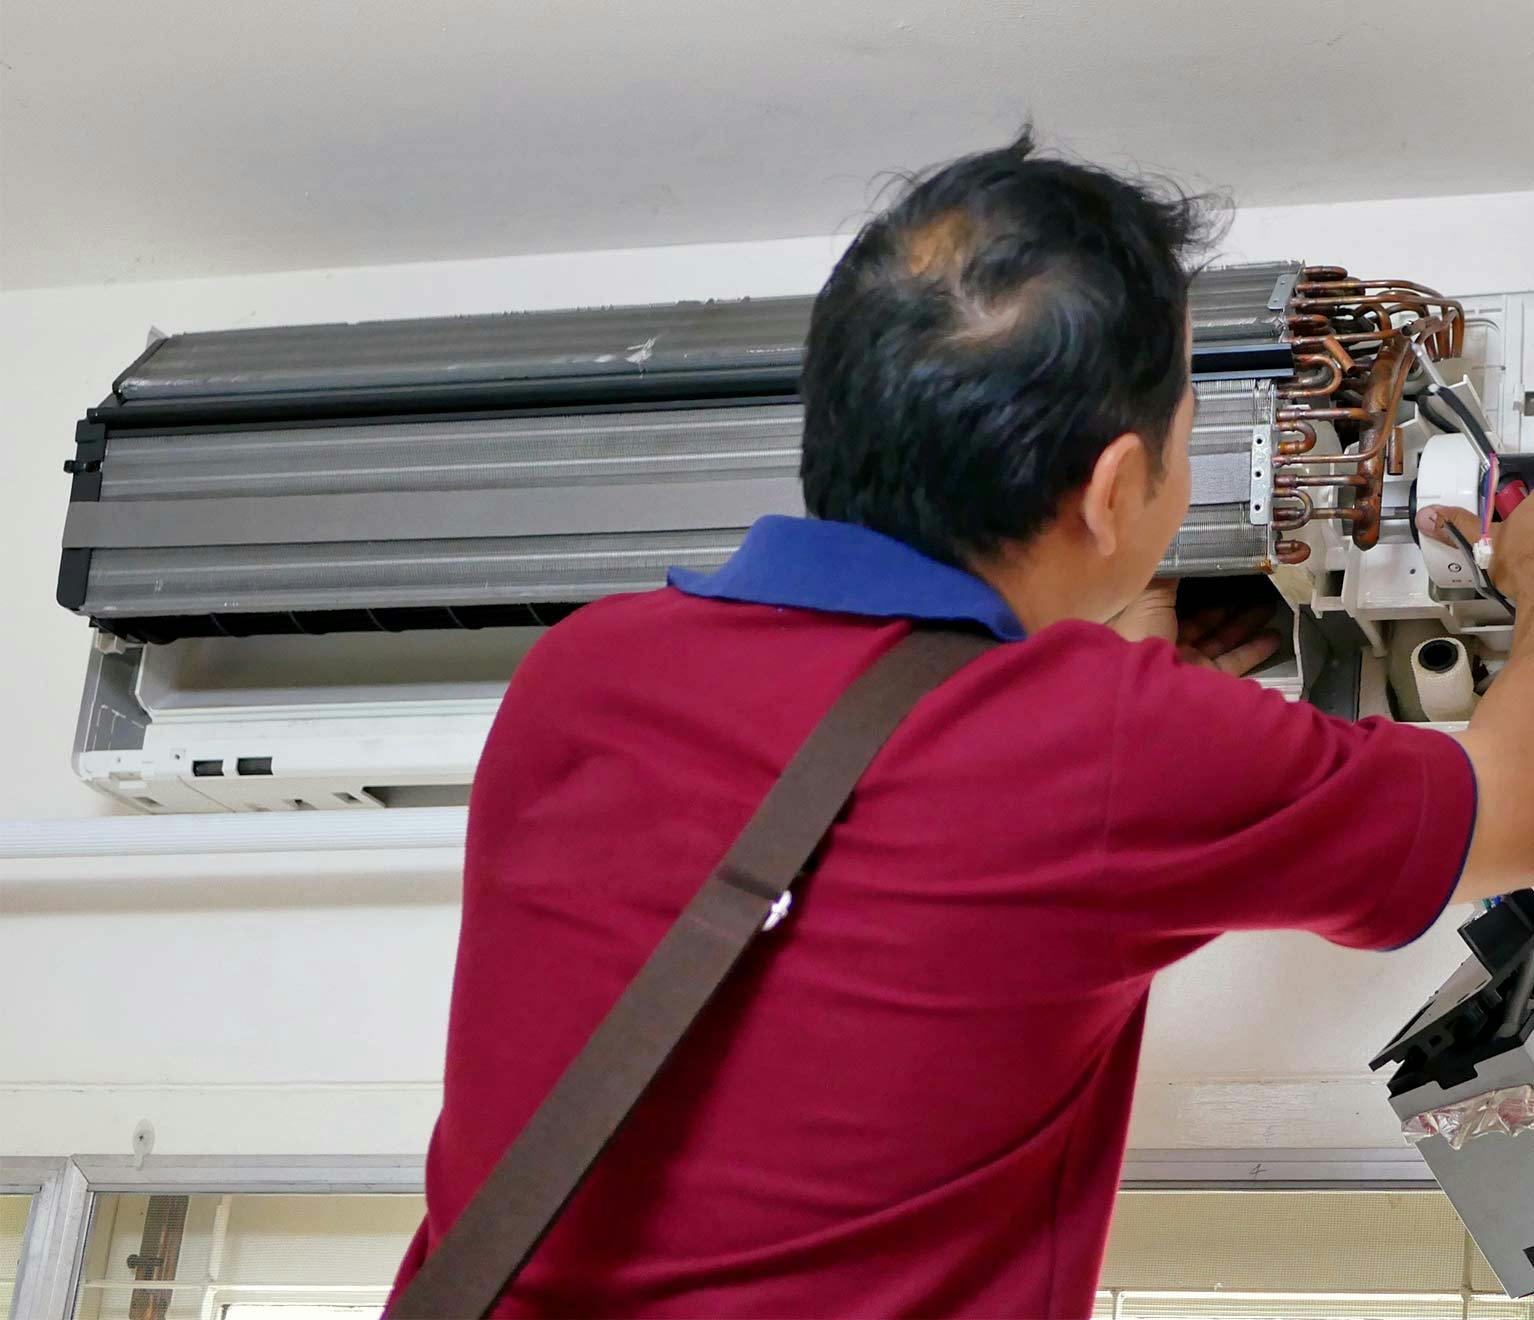 Older man in a red shirt performs repairs on a broken air conditioning unit.